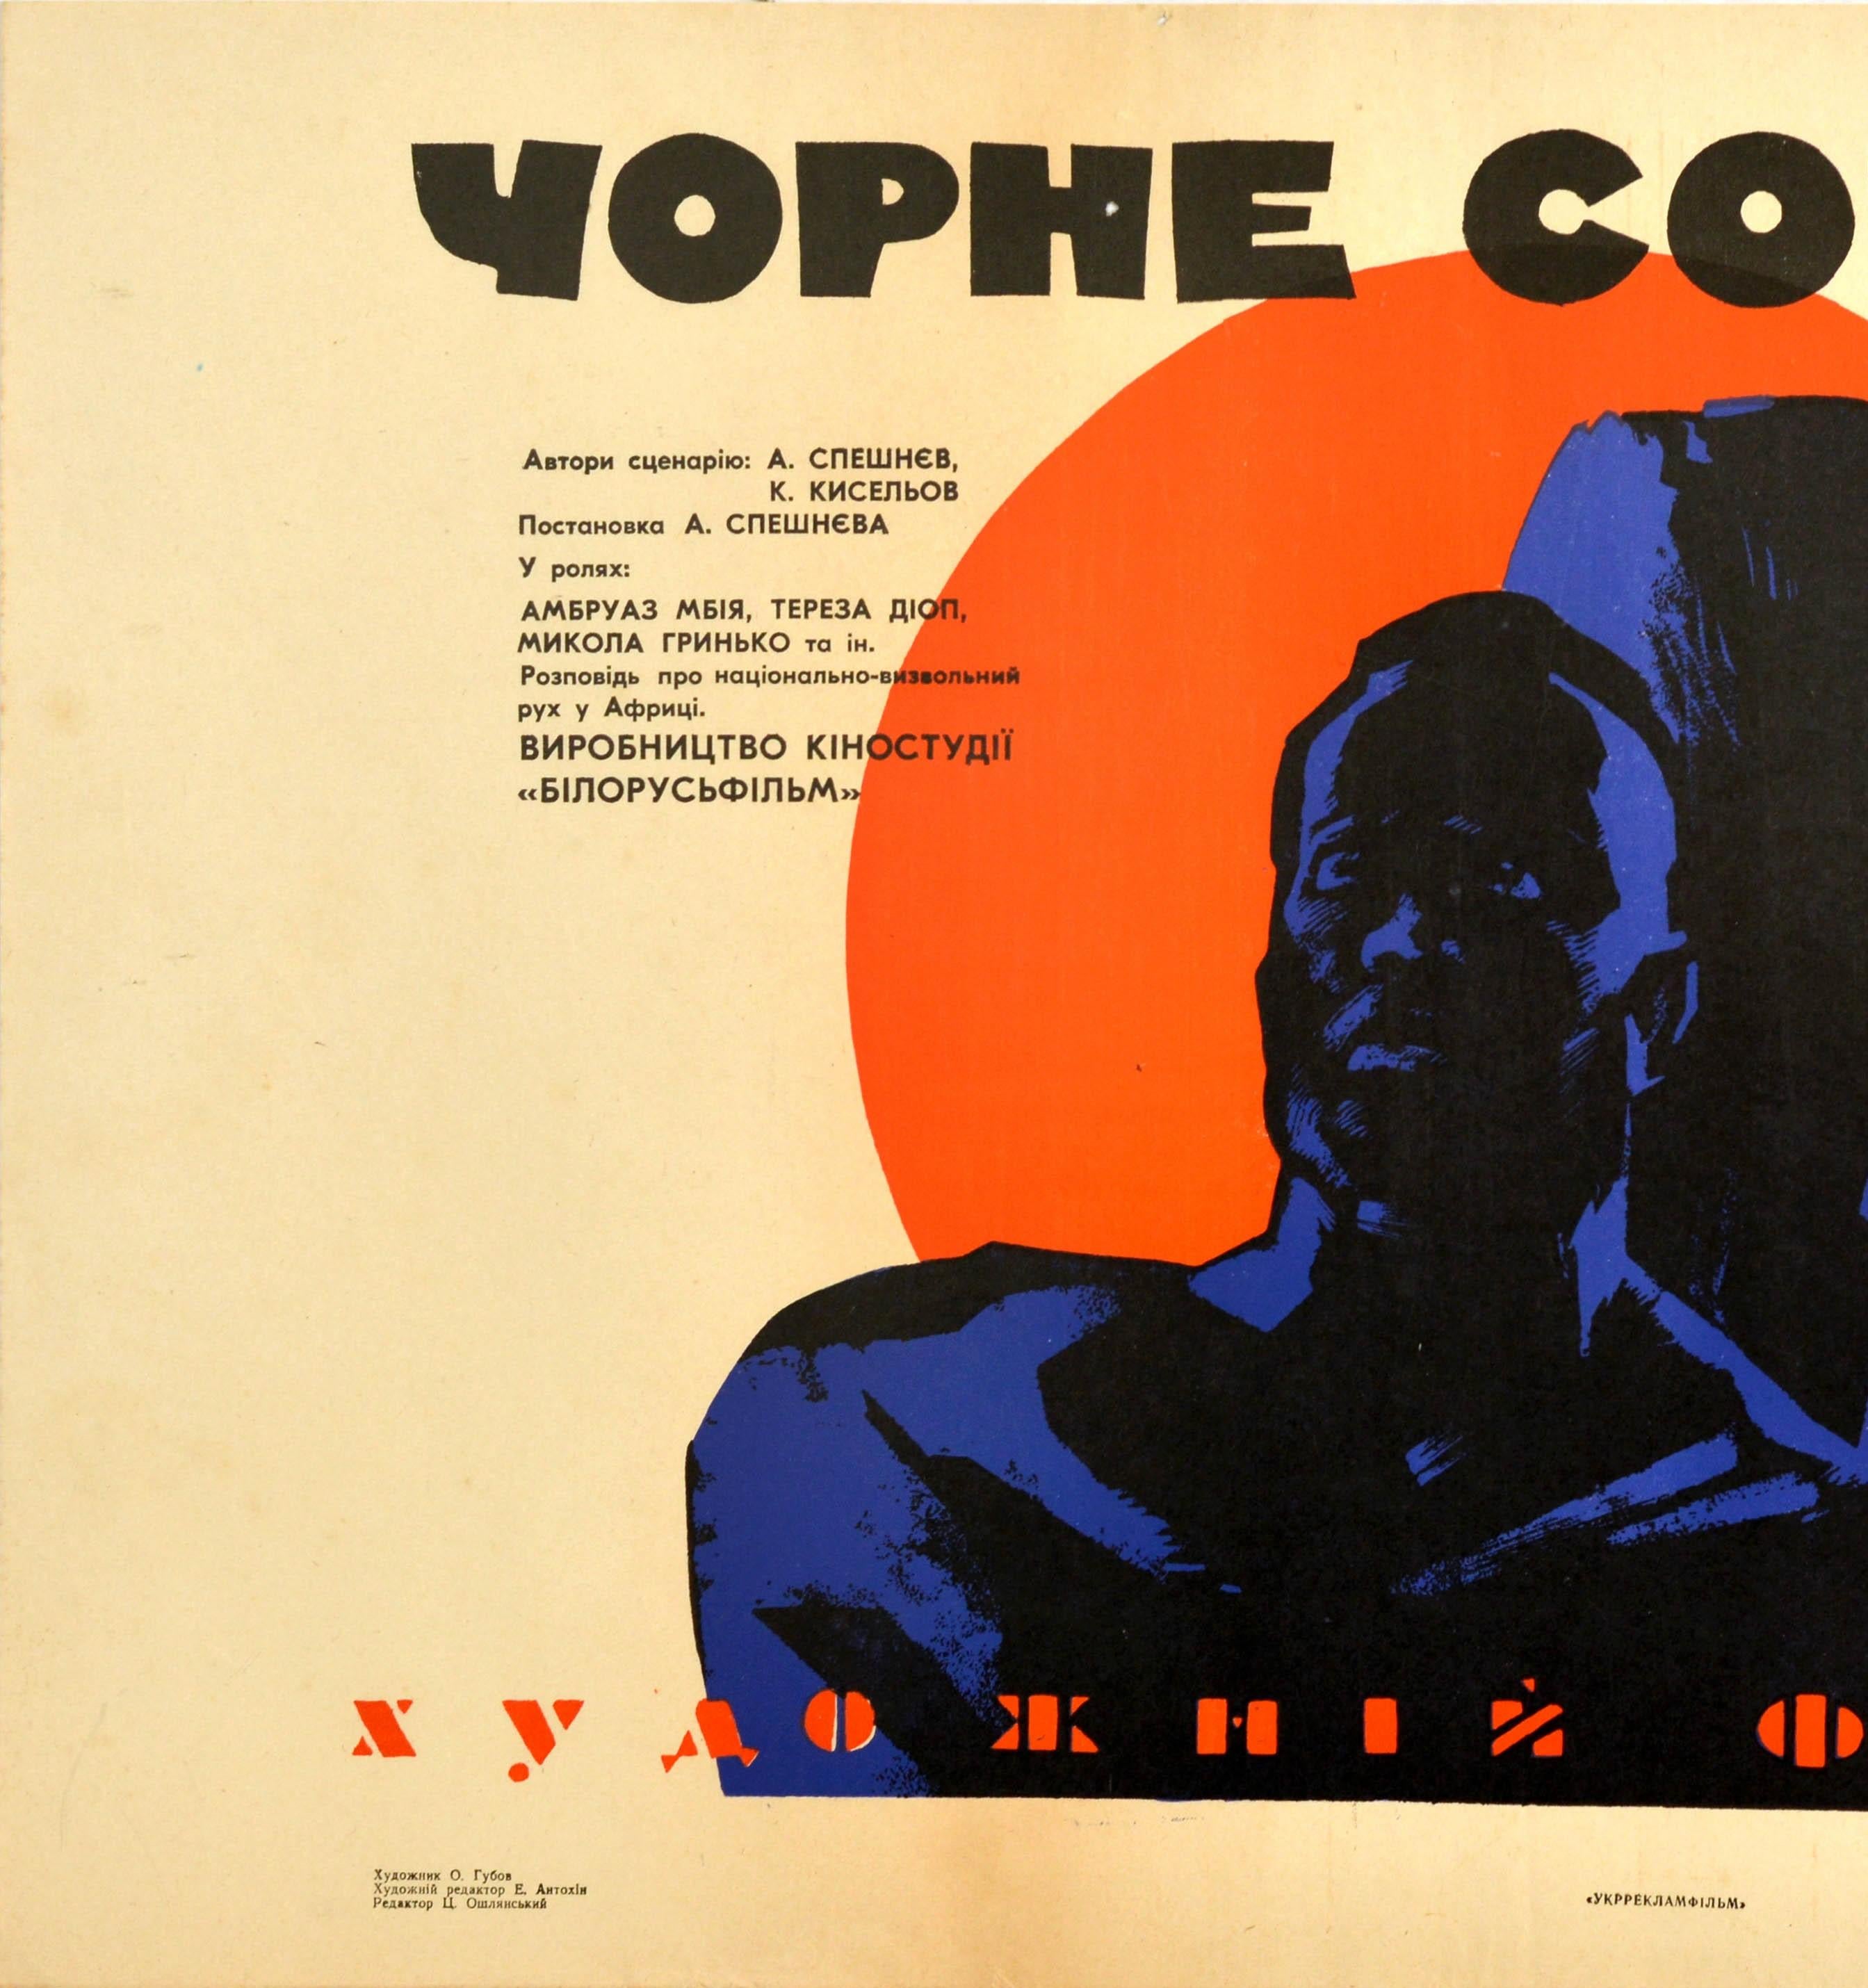 Original vintage Soviet film poster for a fictional drama movie set during the 1960-1965 Congo Crisis - ????? ????? / Black Sun - directed by Aleksei Speshnev and starring Ambroise M'Bia, Therese Diop and Nikolay Grinko featuring a dramatic image in